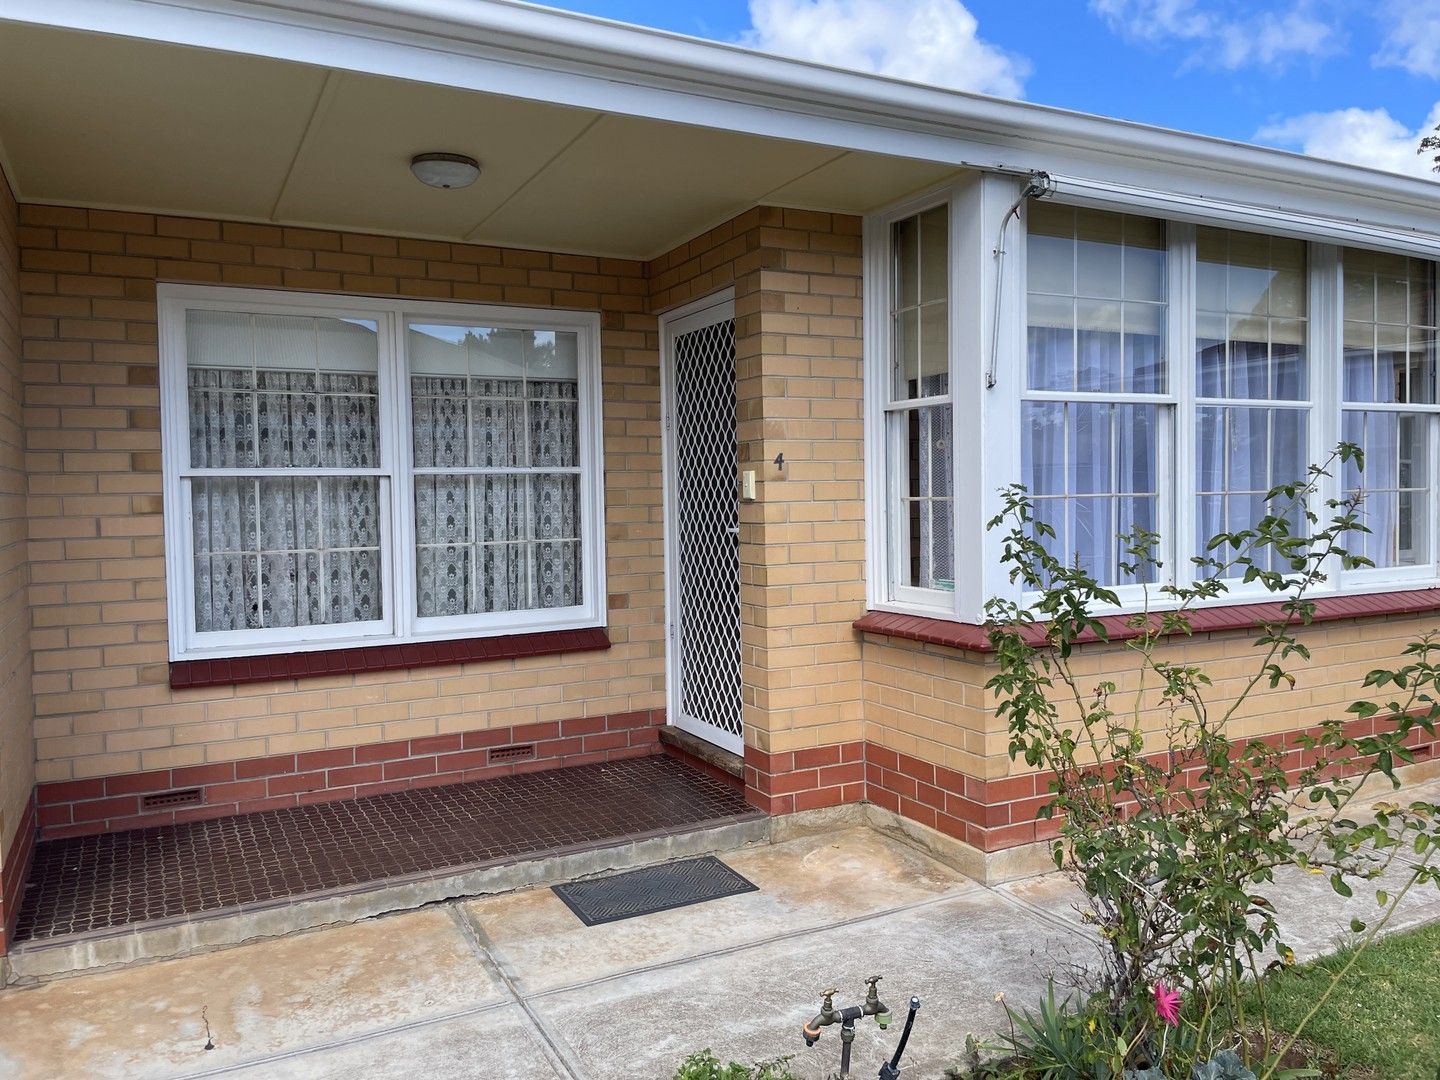 2 bedrooms Apartment / Unit / Flat in 4/14 Beaufort Street WOODVILLE SA, 5011